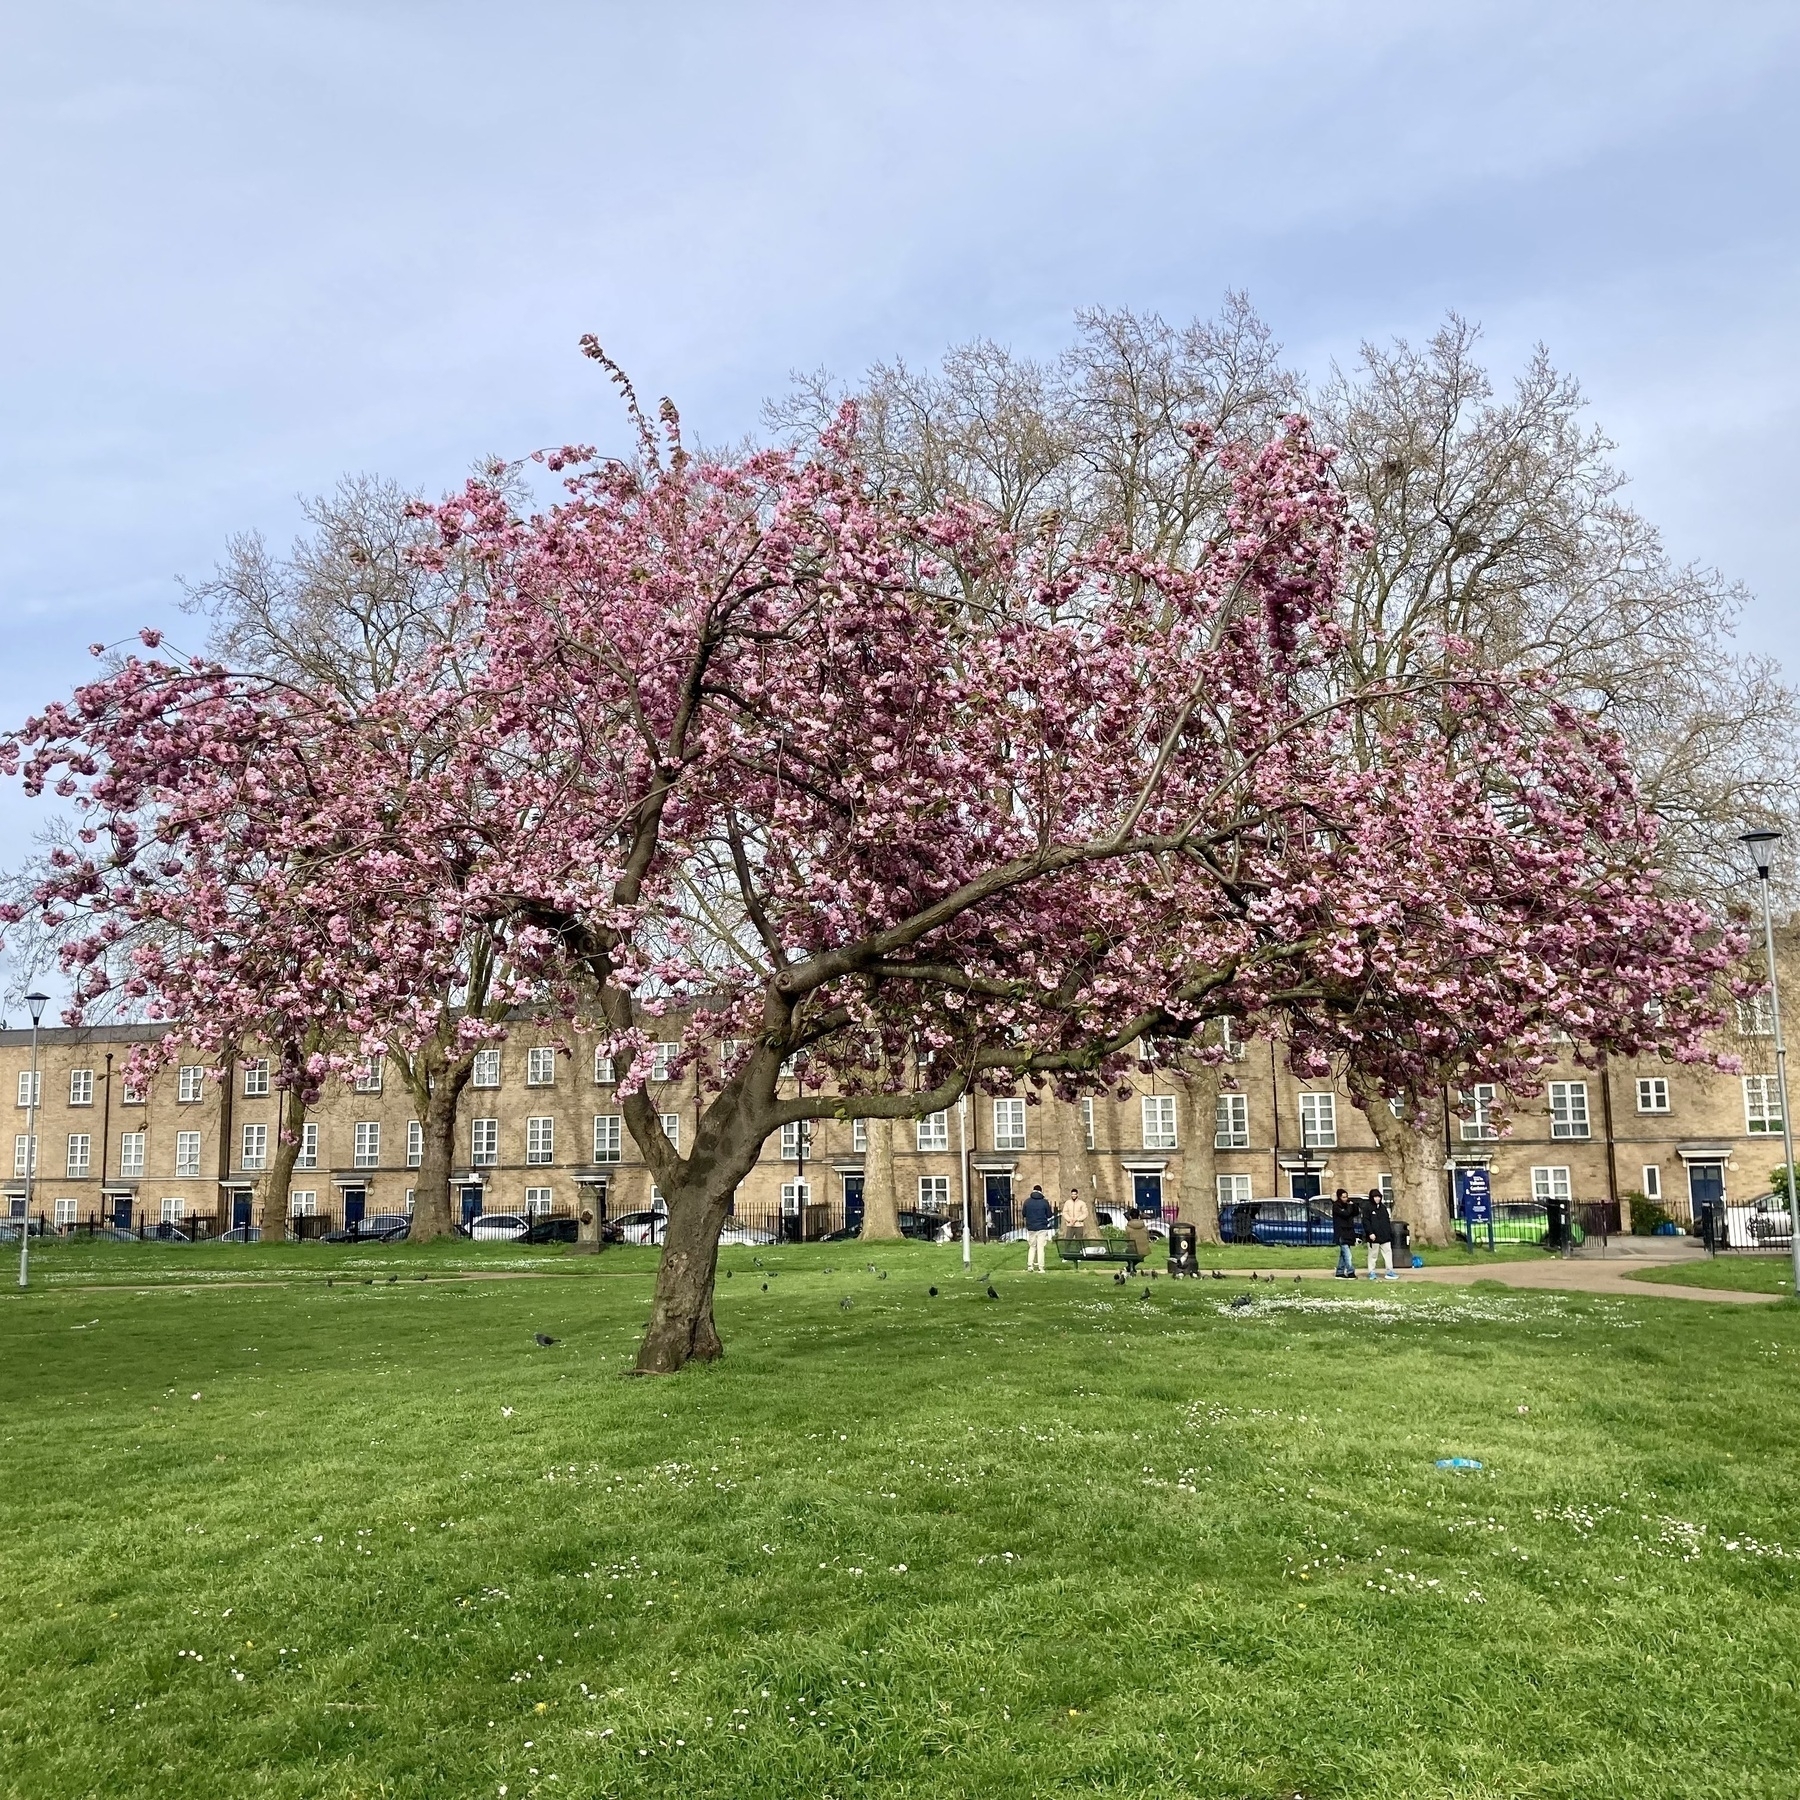 A cherry tree in full blossom in a small park in London's East End